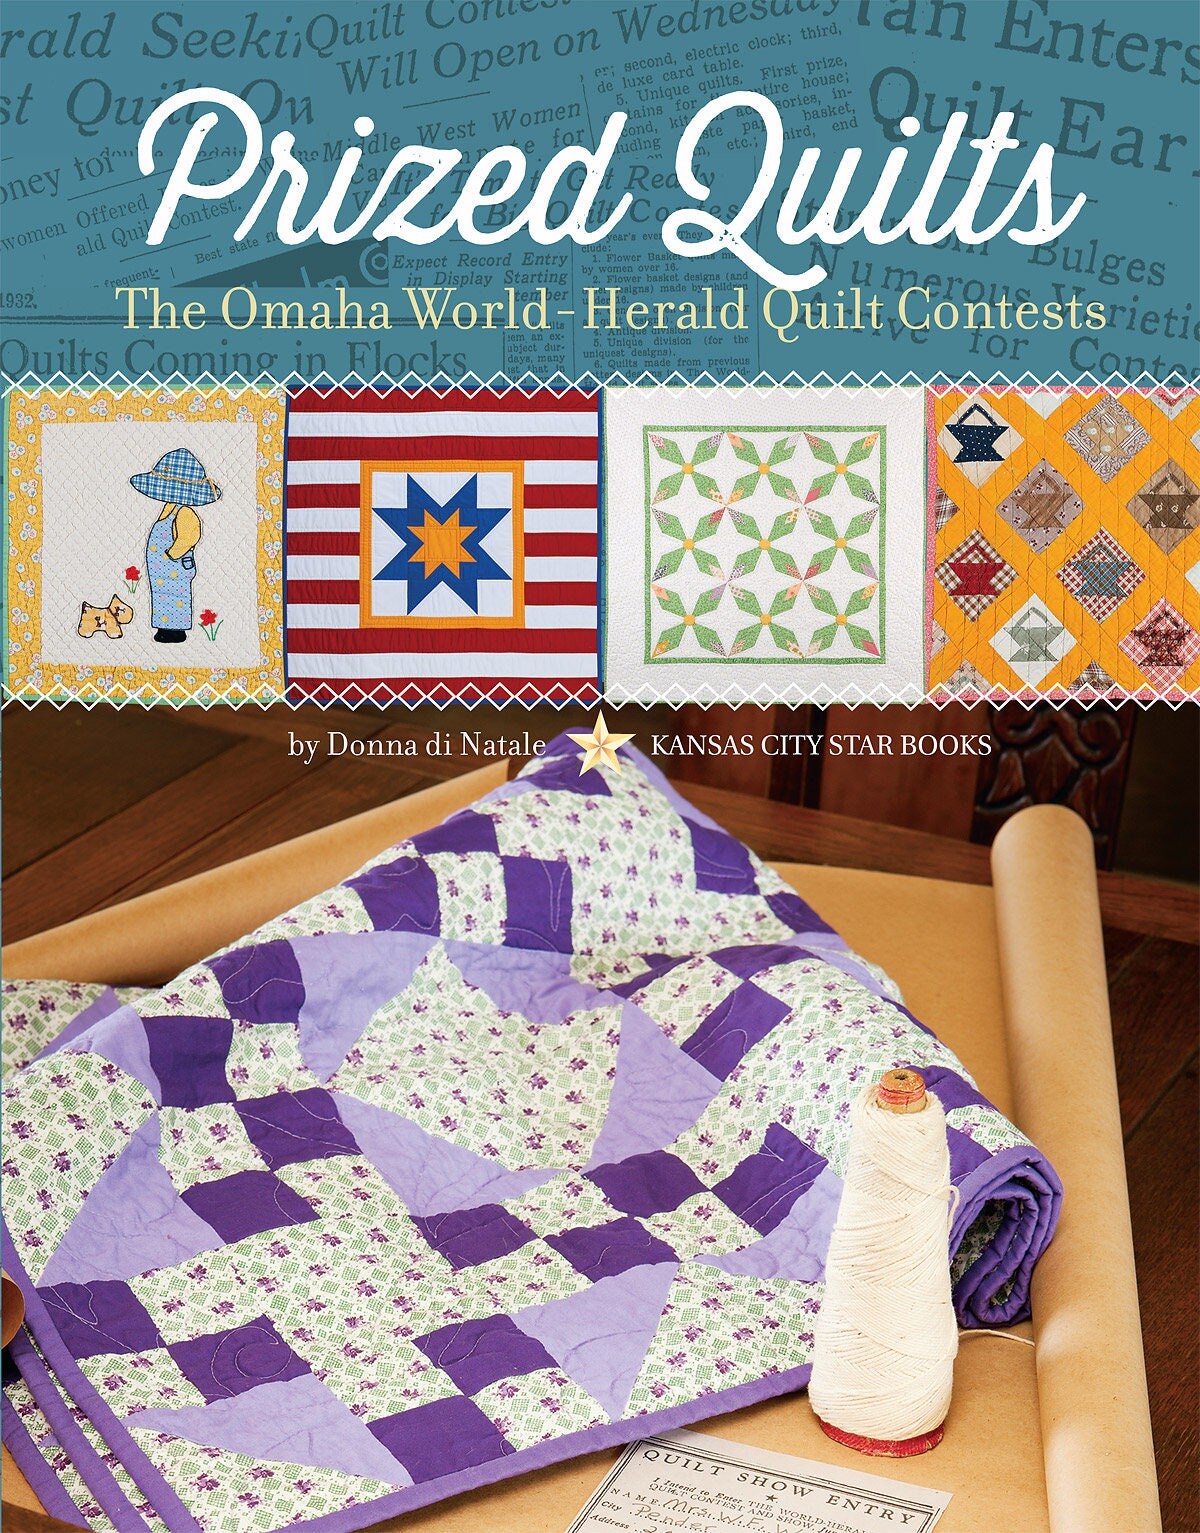 Prized Quilts Quilt Pattern Book by Donna Di Natale for Kansas City Star Quilts